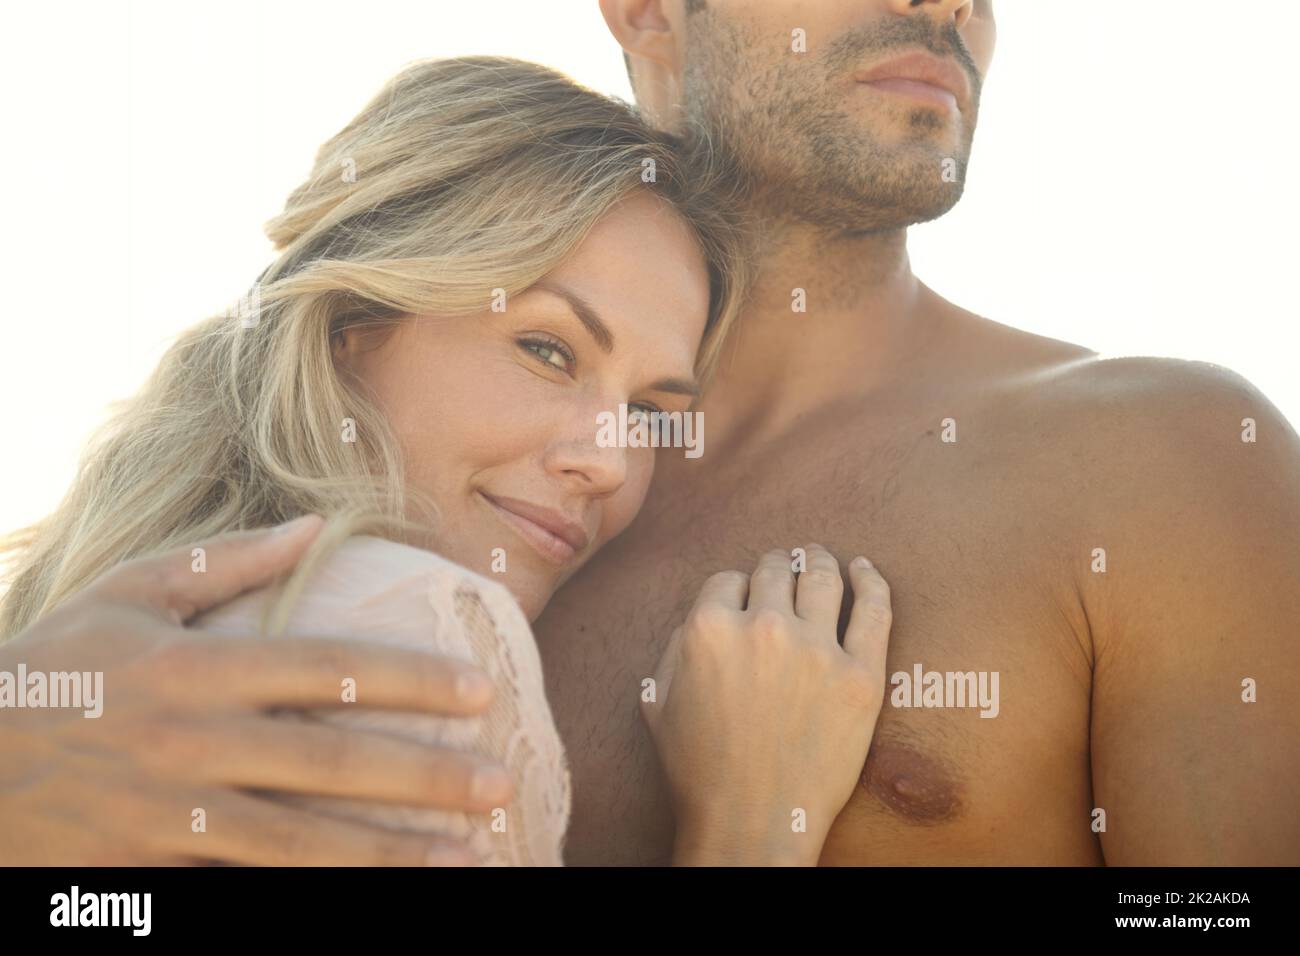 Safe in his arms. Head and shoulders portrait of an attractive young woman embracing her husband on a sunny day. Stock Photo